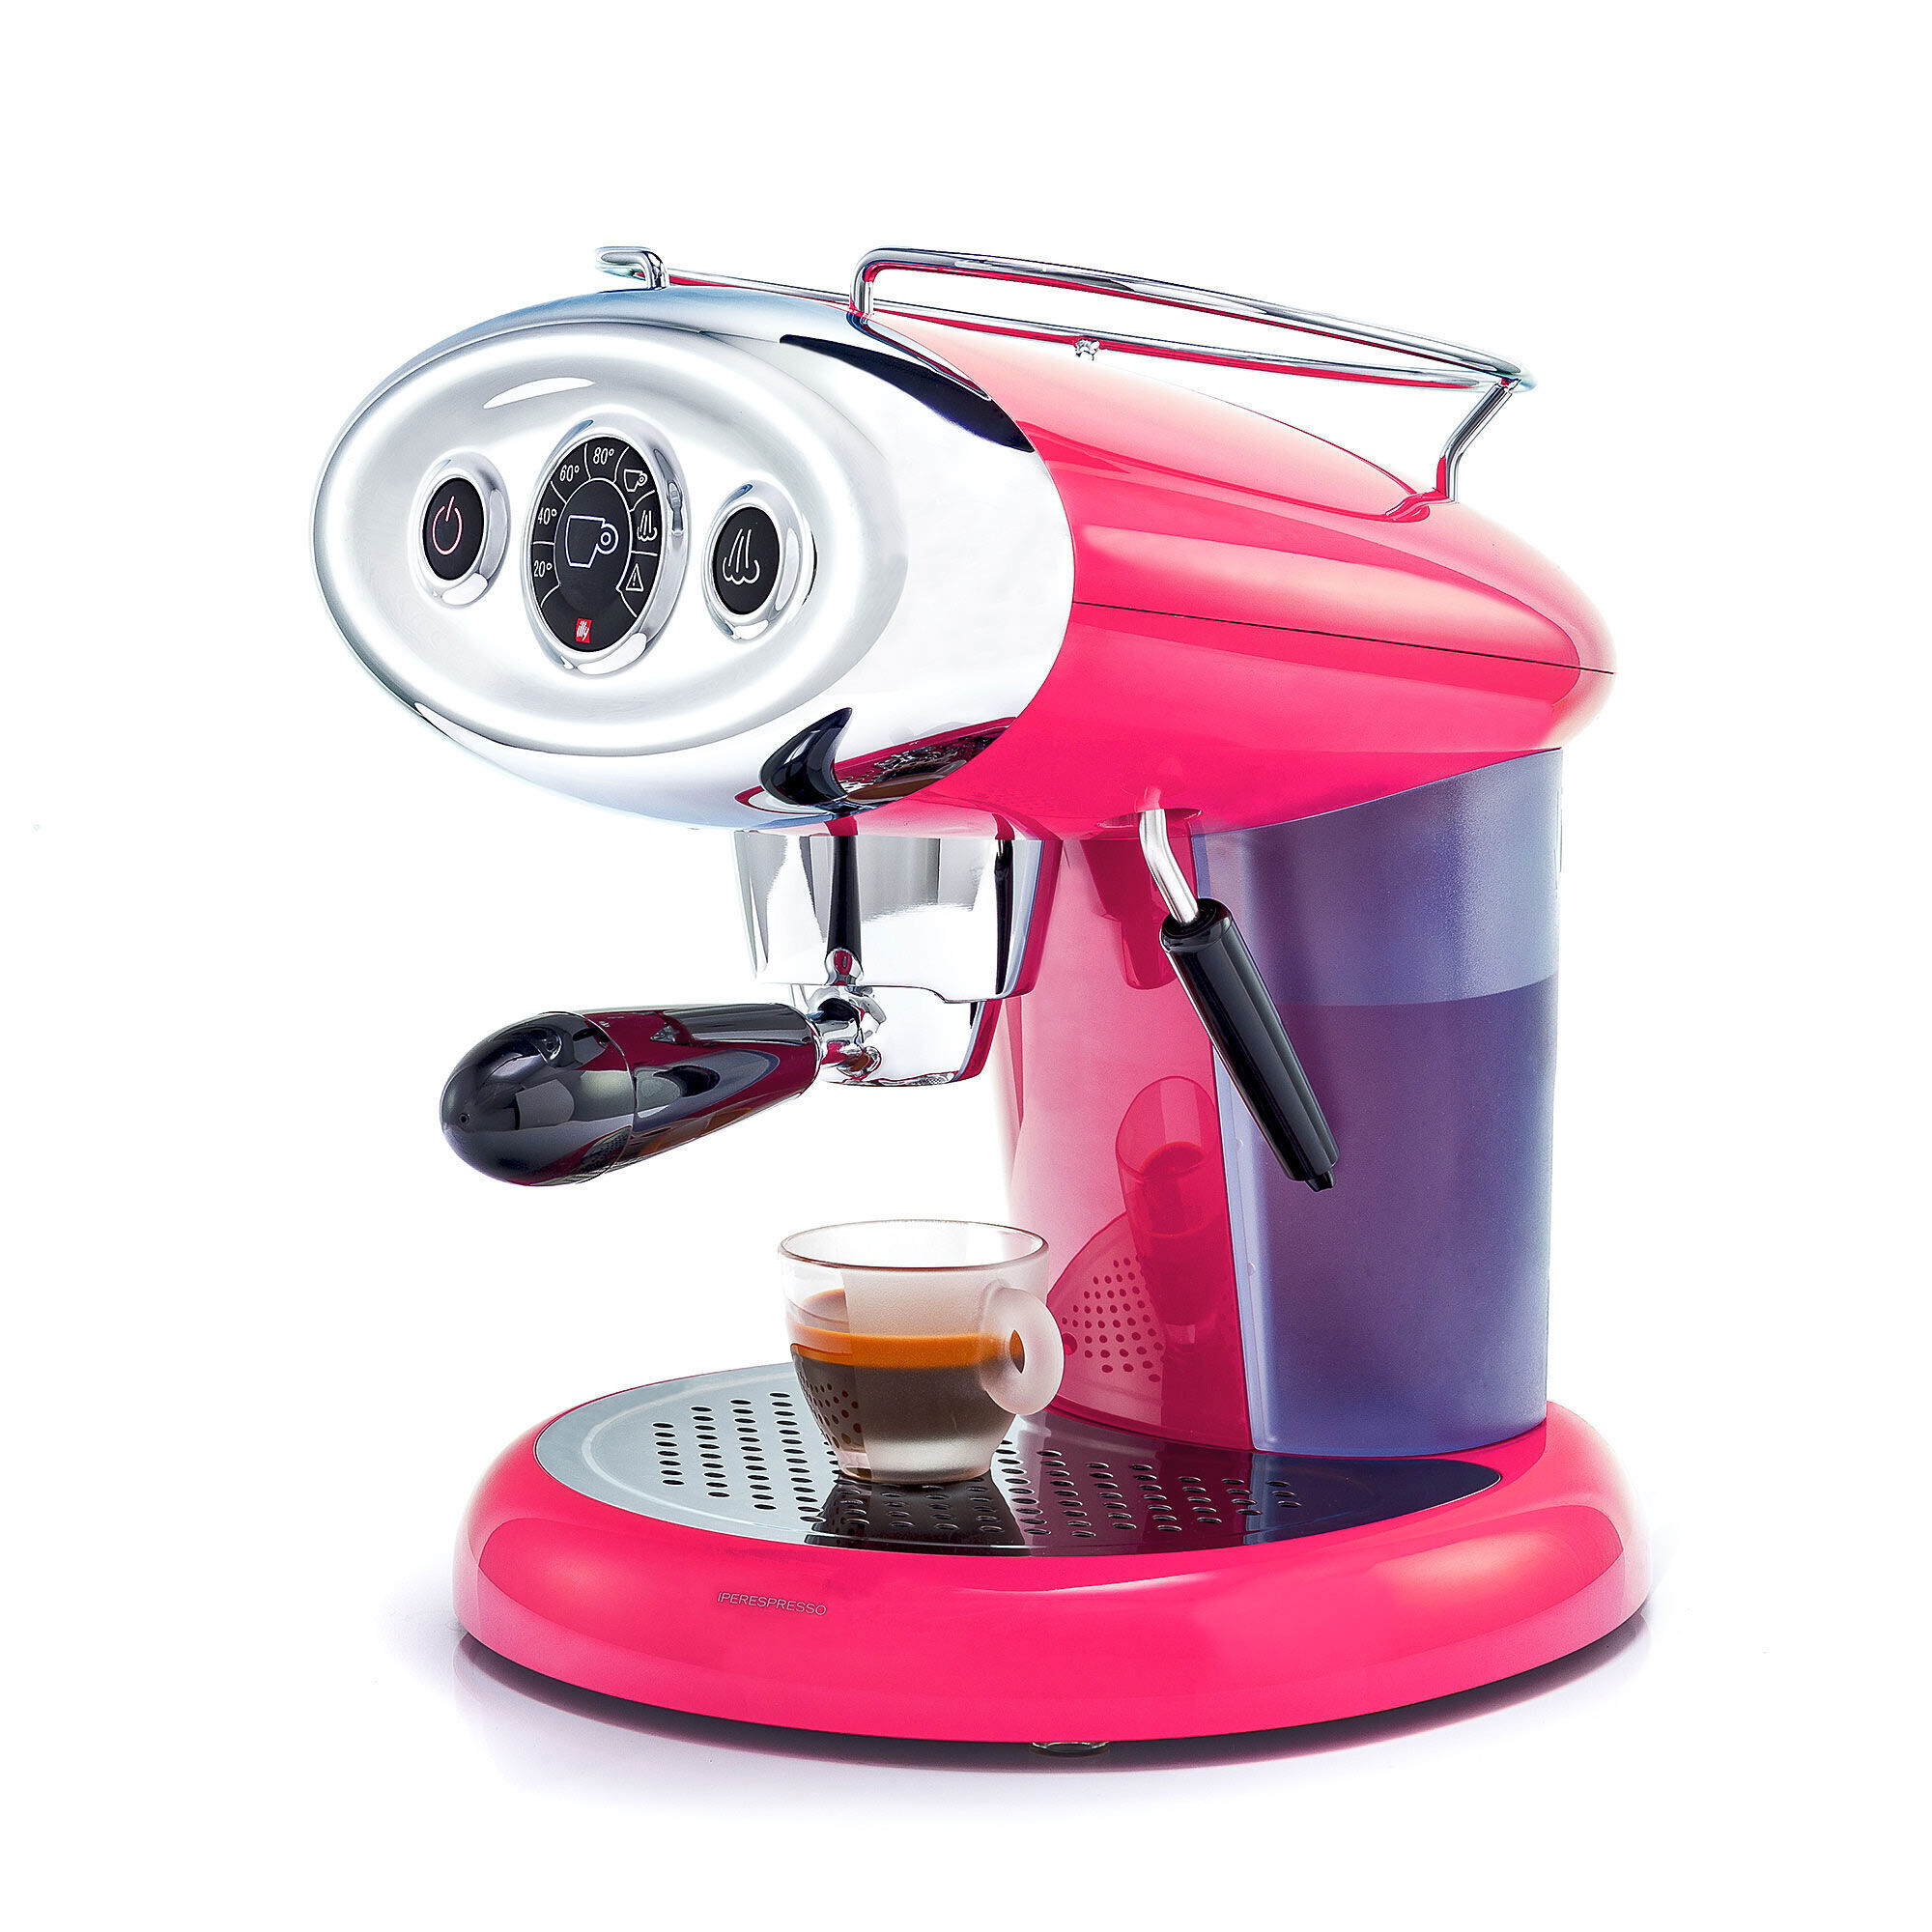 X7.1 Iperespresso Capsules Coffee Machine - Pink limited edition